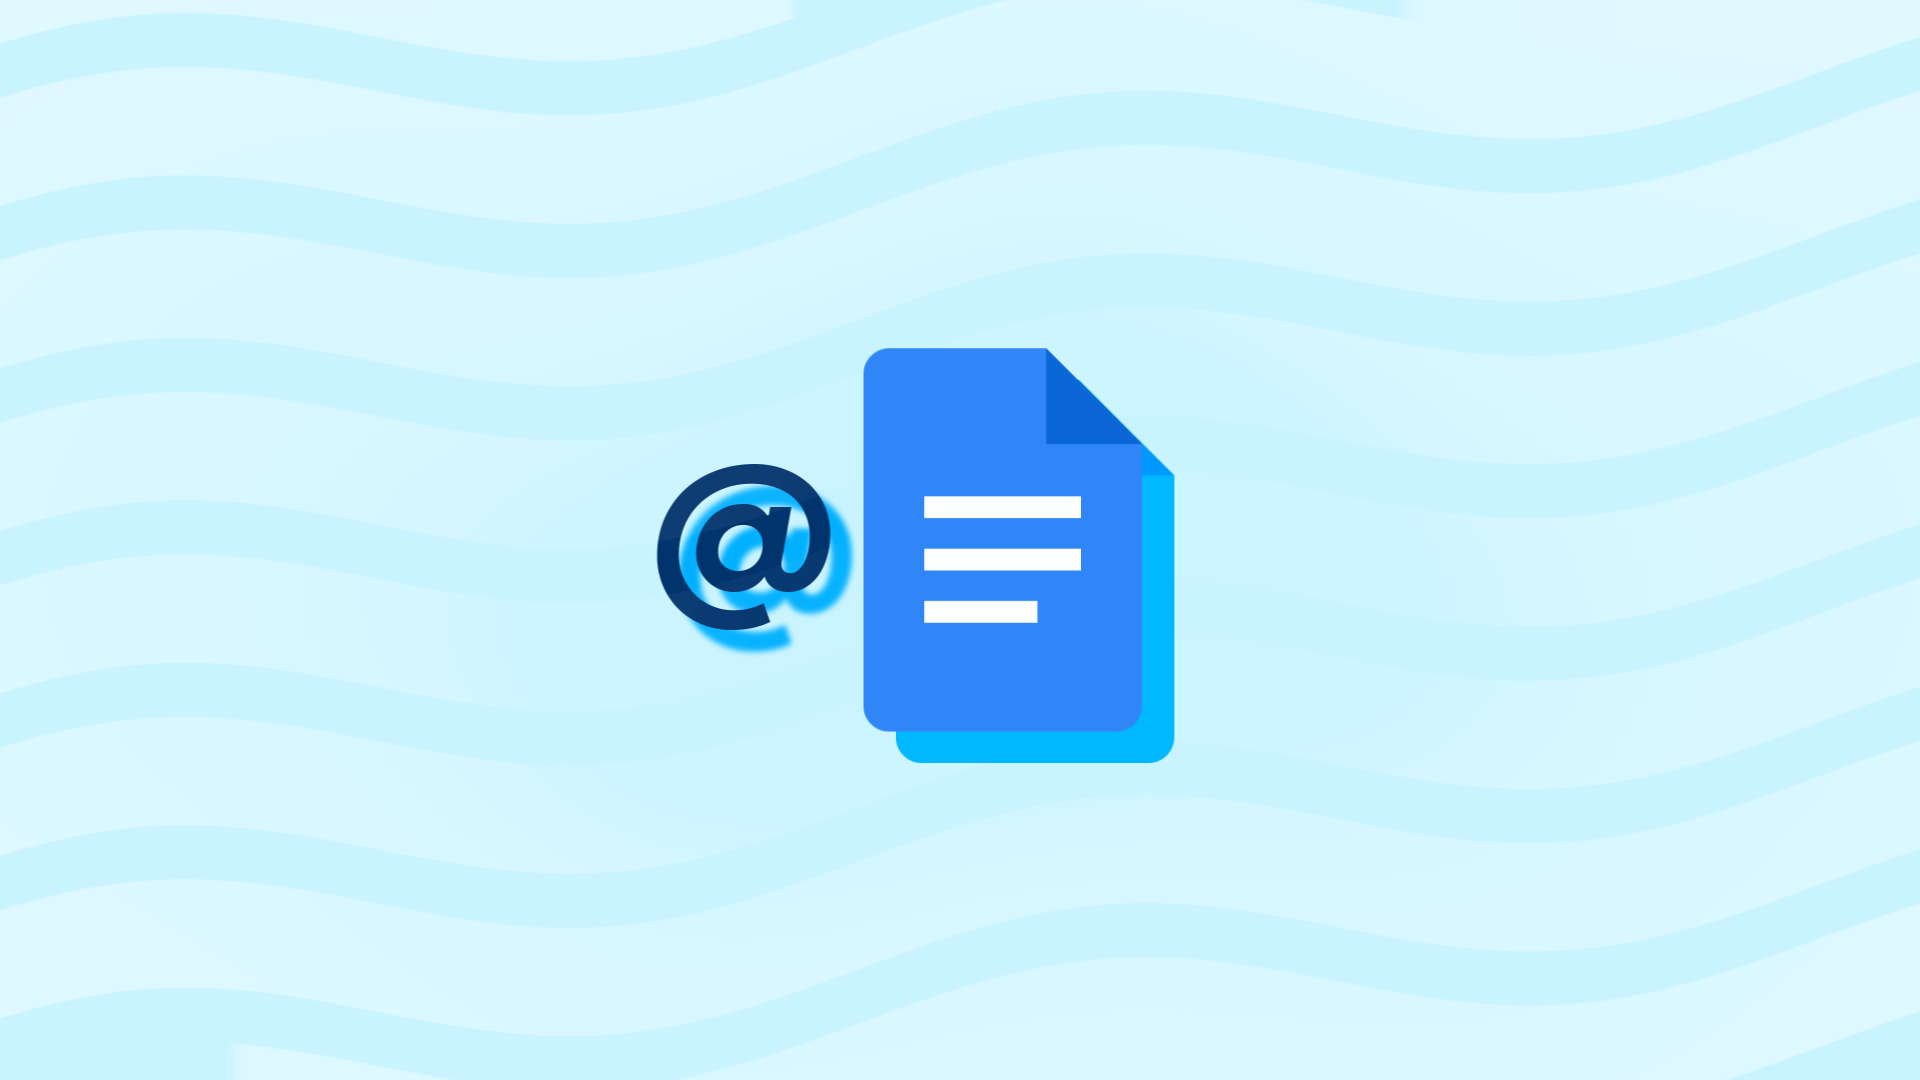 The at symbol and the Google Docs logo against a light blue background with wavy lines